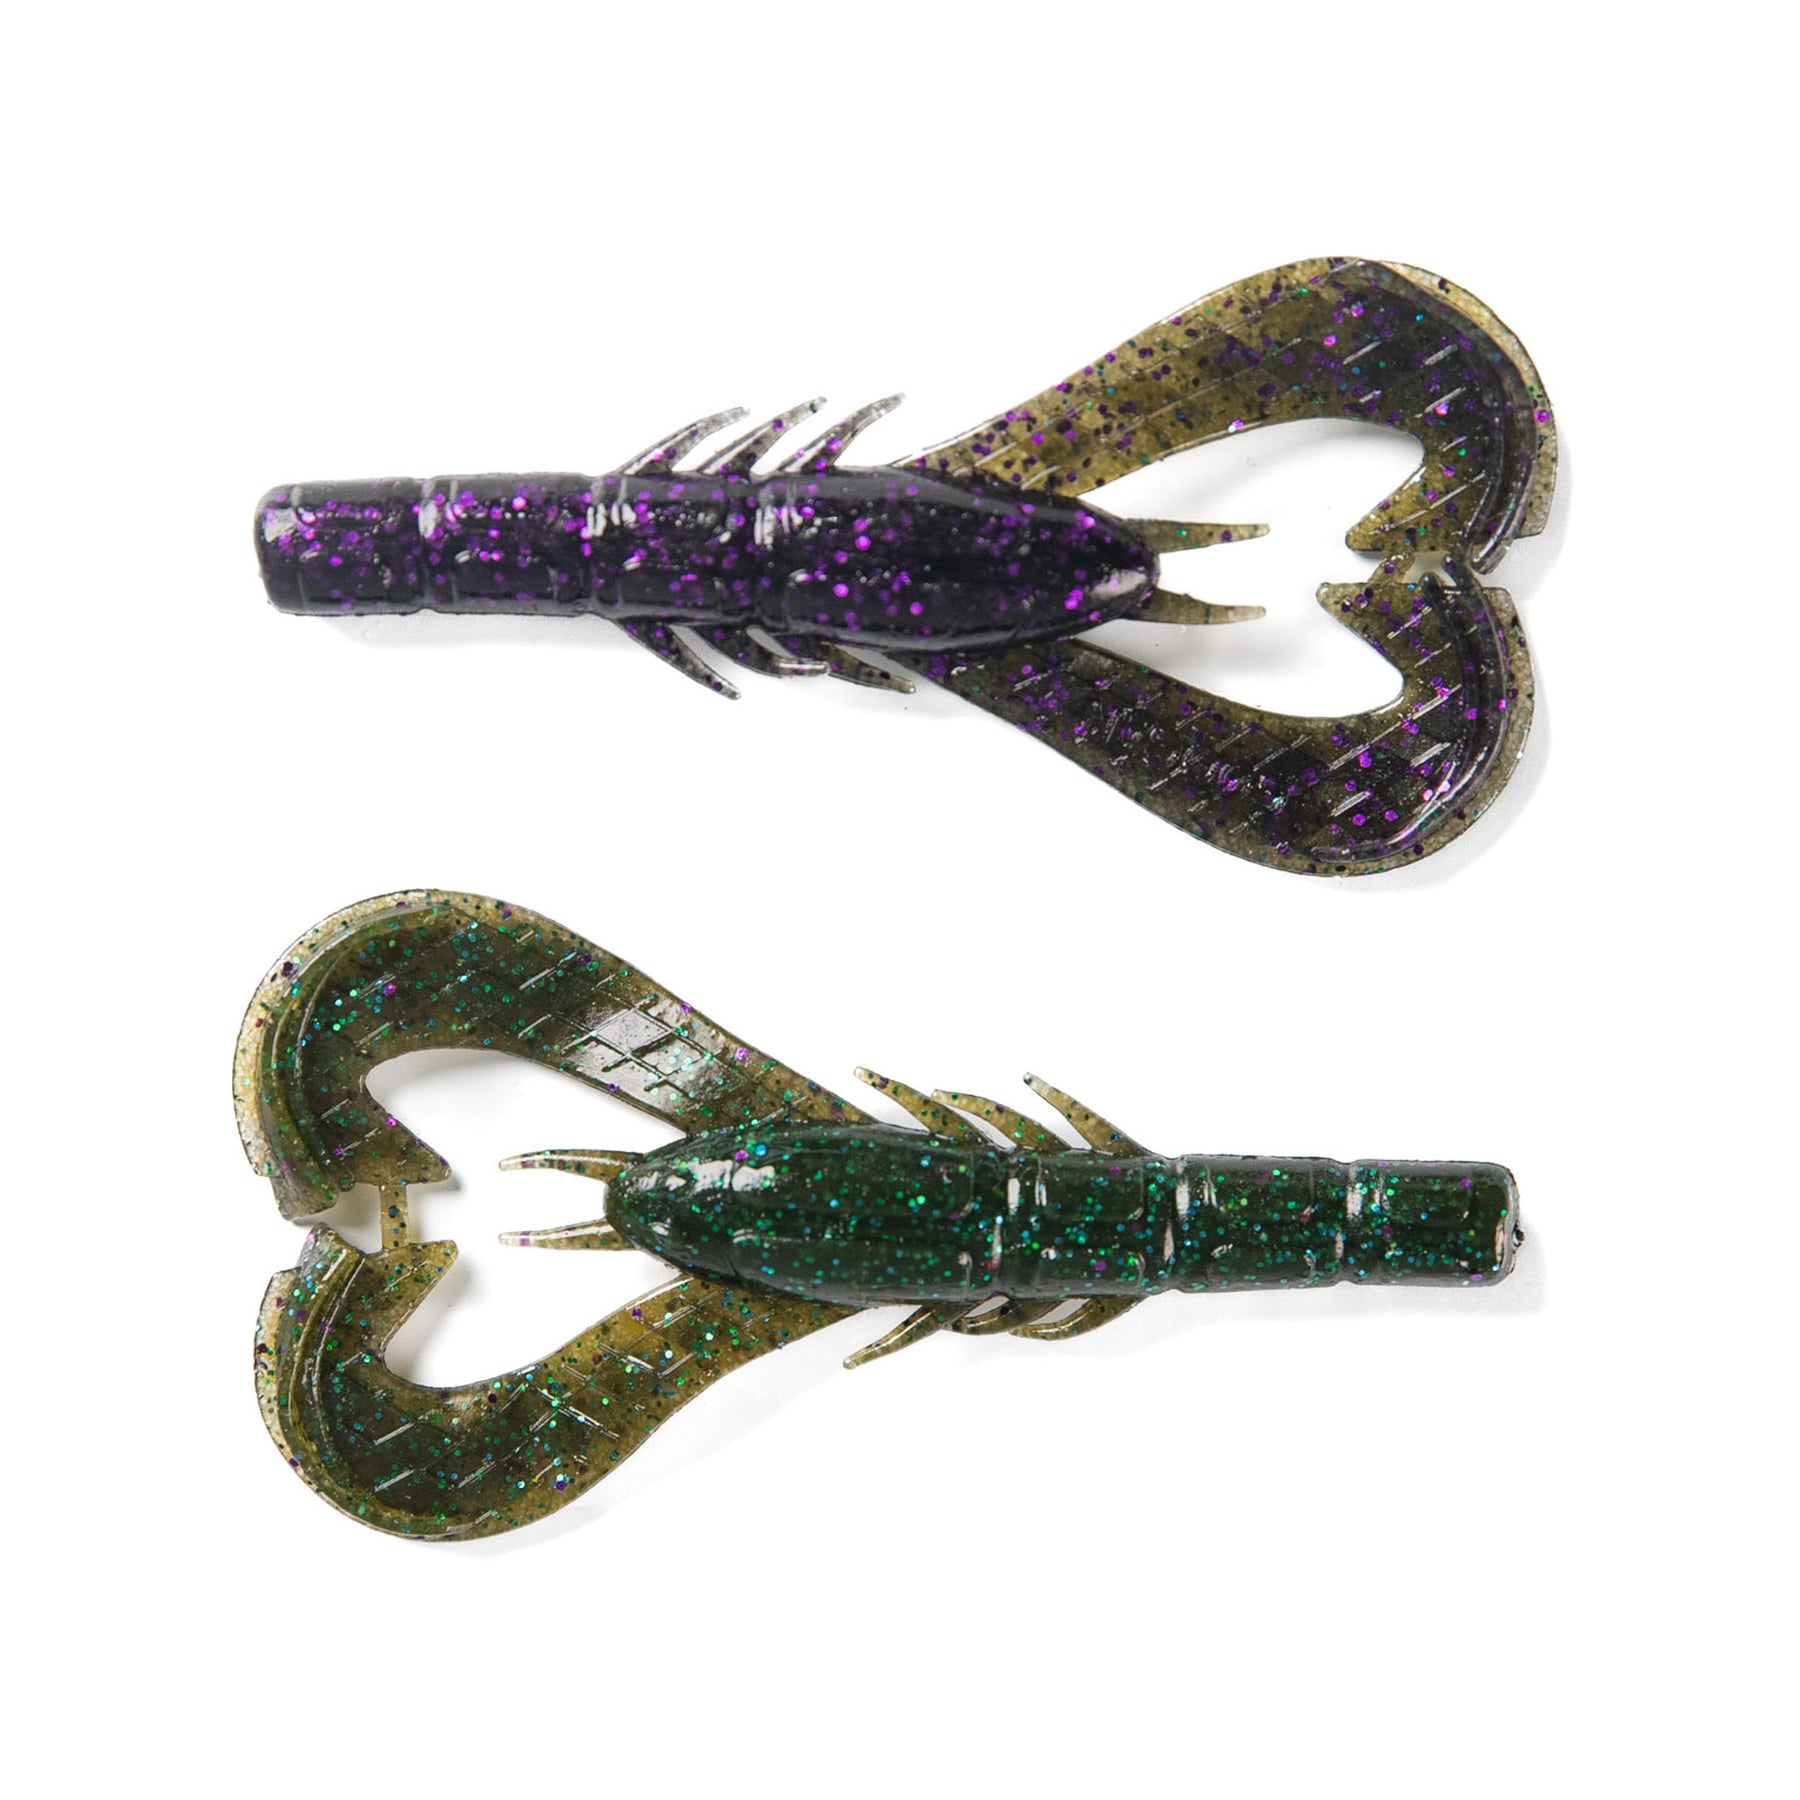 Texas rigged Bandito bug or Krackin Craw? Which one are YOU dangling? Let  us know why down below 📸 @stokersbassing #GooganBaits